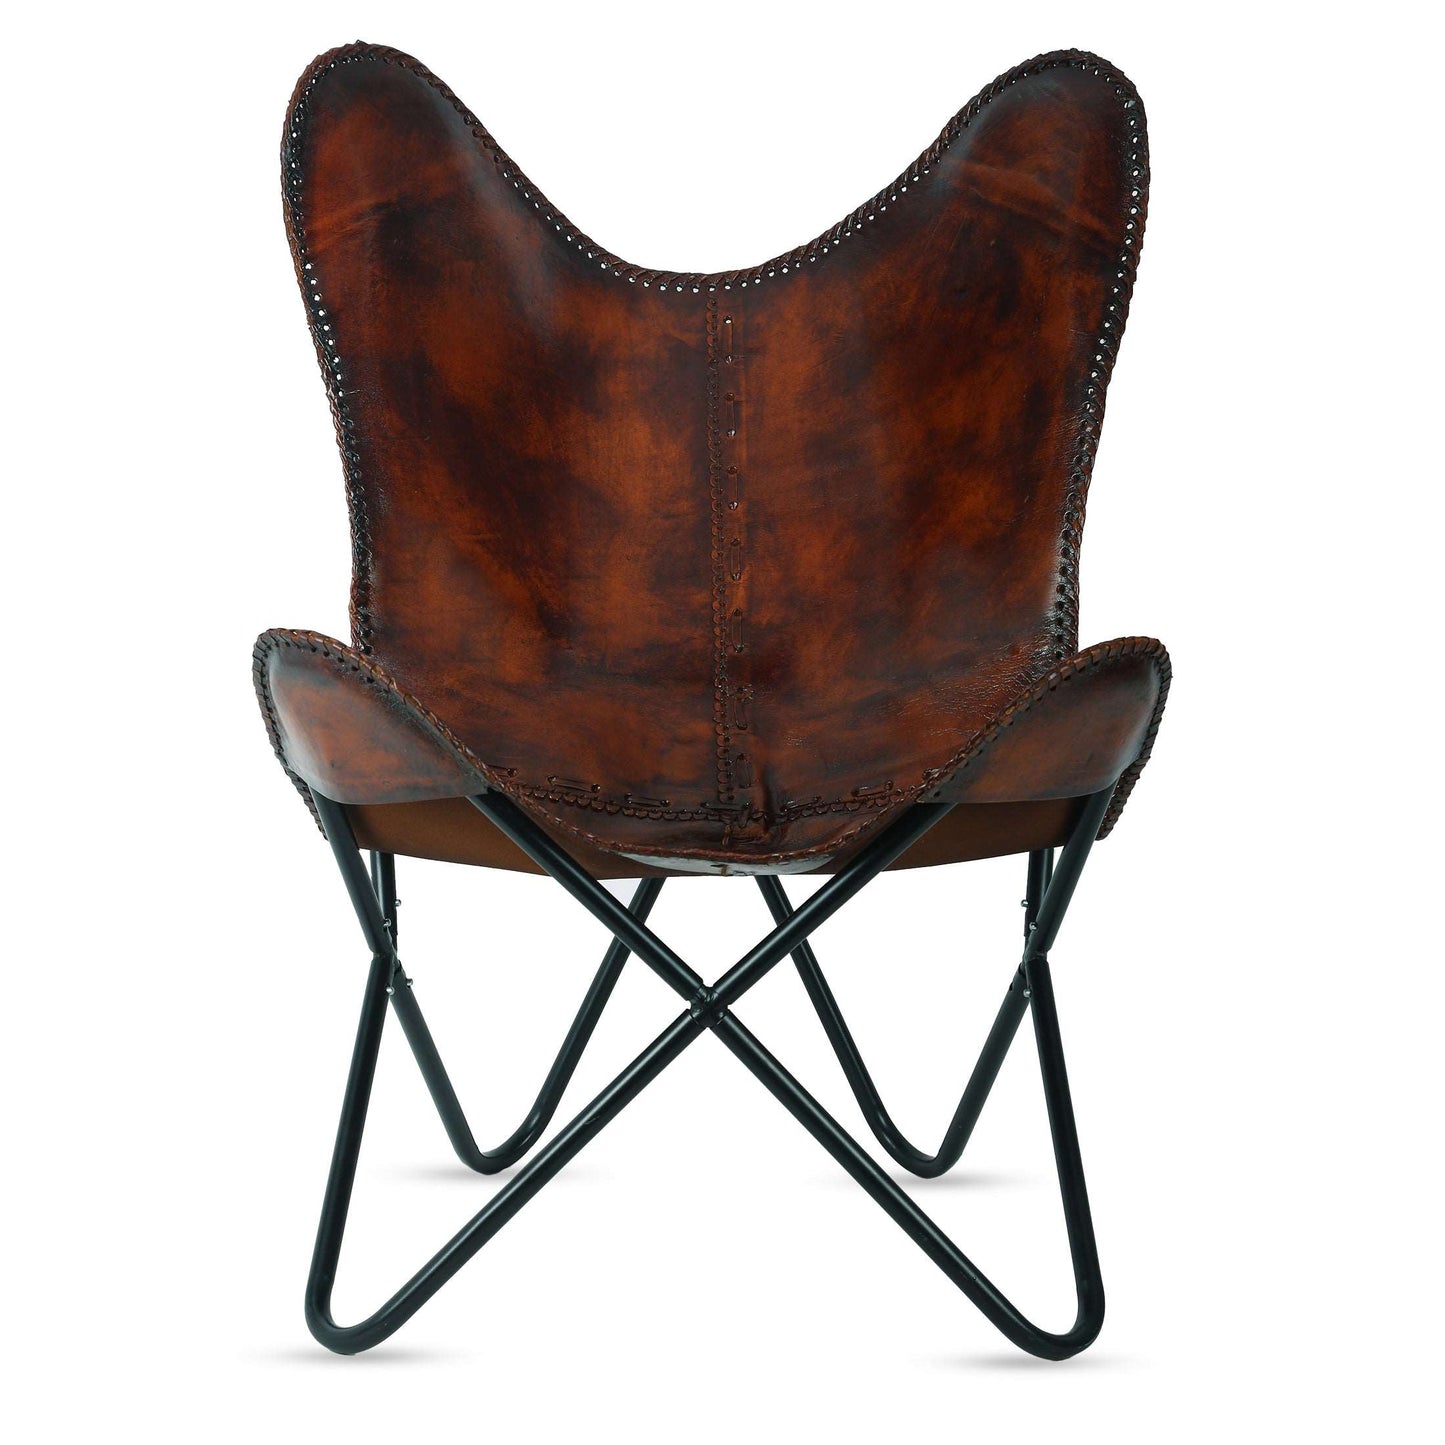 Handmade Leather Butterfly Chair Living Room- Side Hand Stich Leather Chair-Handmade with Powder Coated Folding Black Iron Frame